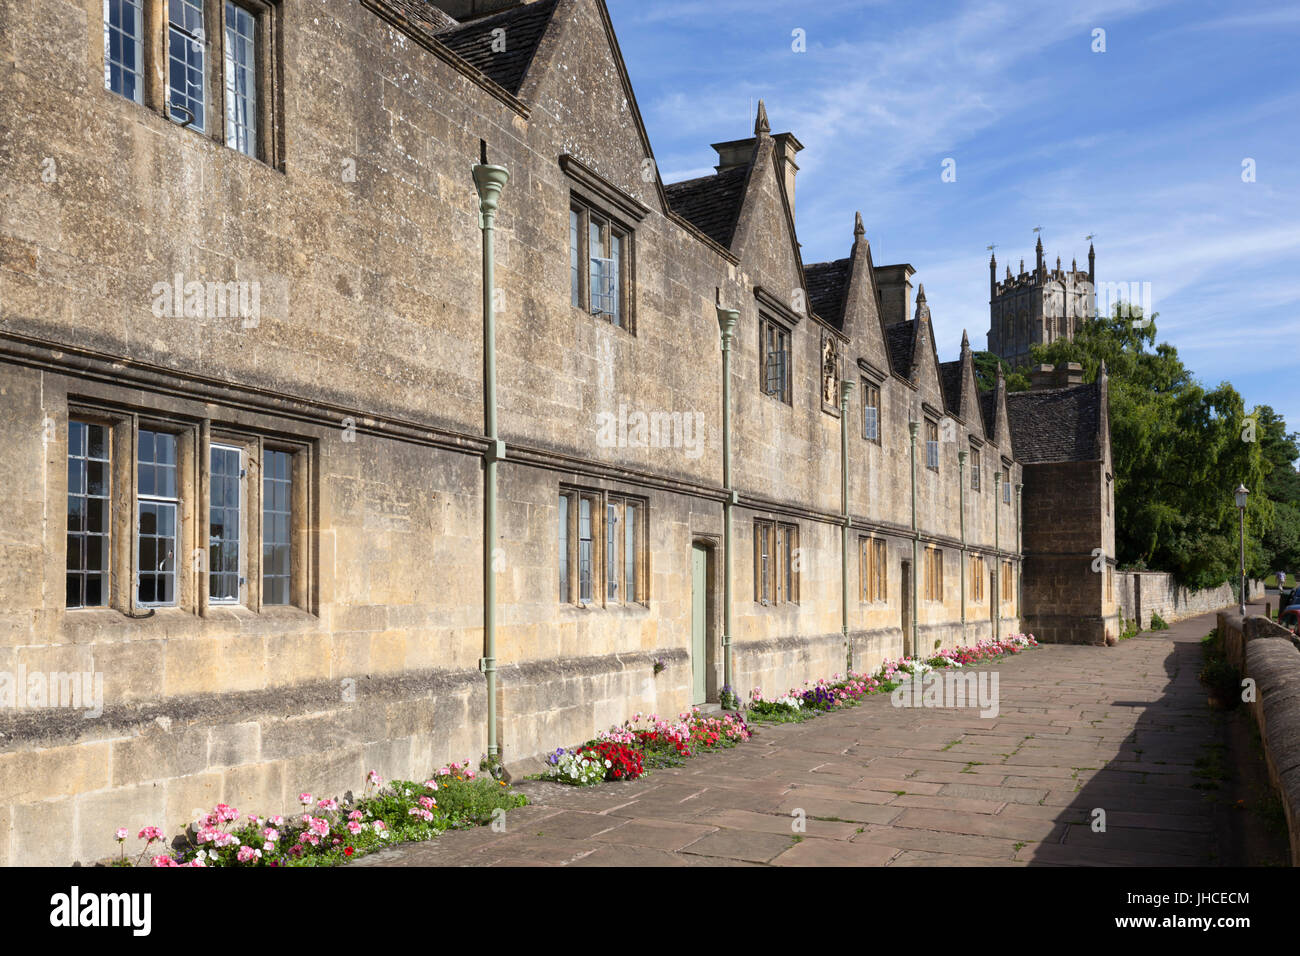 Almshouses and St James church, Chipping Campden, Cotswolds, Gloucestershire, England, United Kingdom, Europe Stock Photo